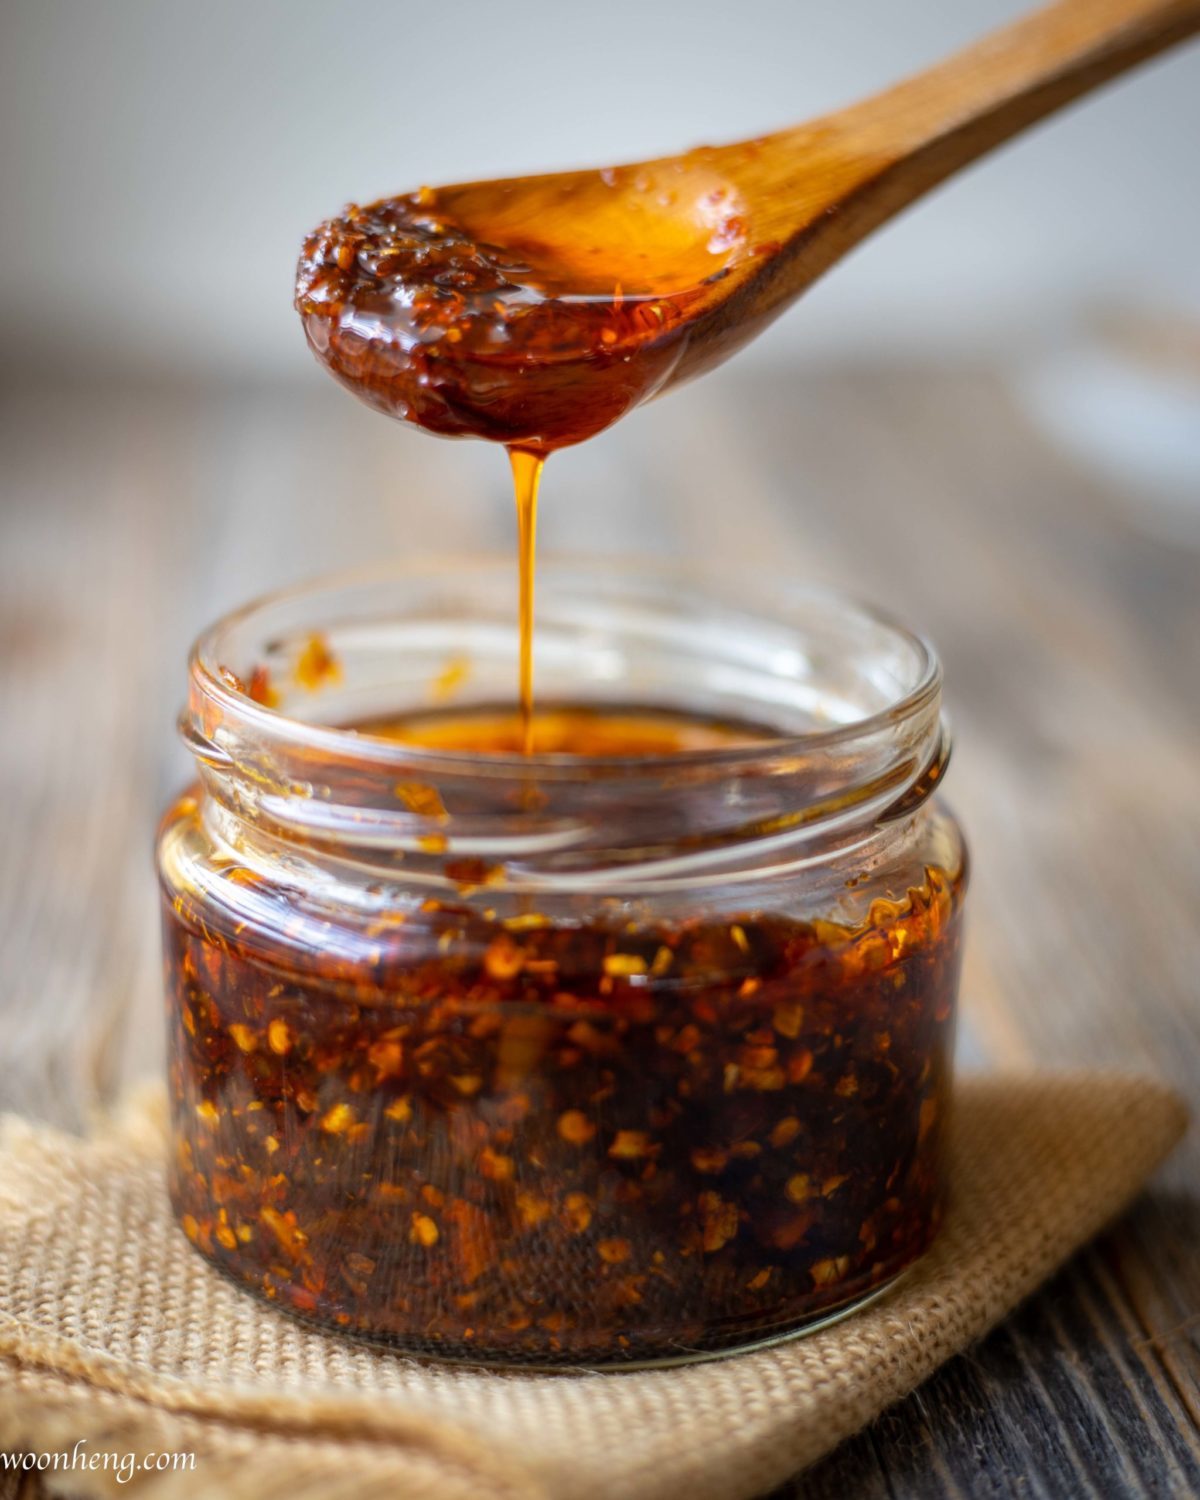 How to make Chili Oil from Food Scraps - WoonHeng